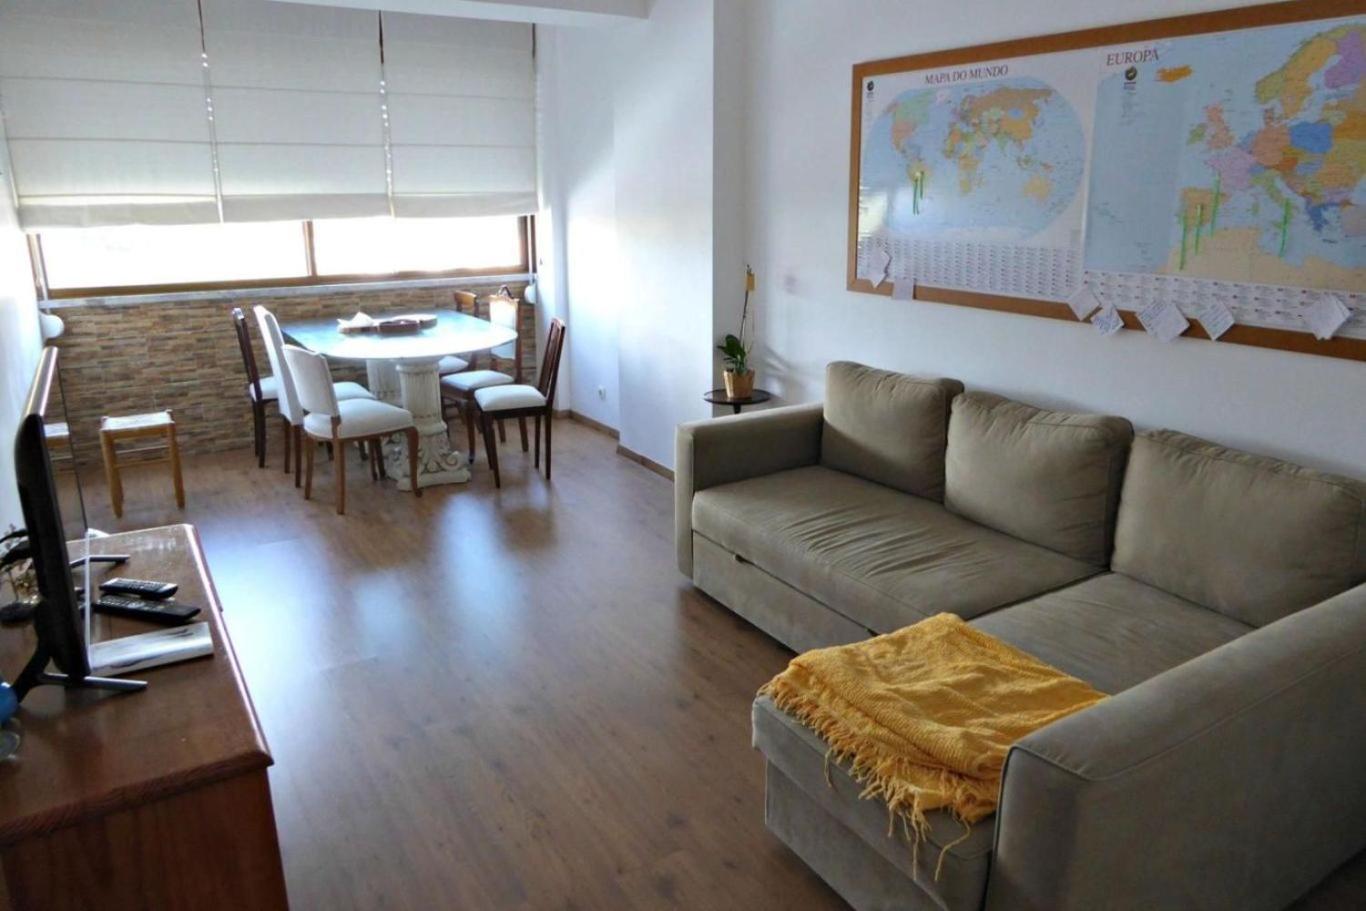 Be Local - Apartment with 2 bedrooms in Infantado in Loures